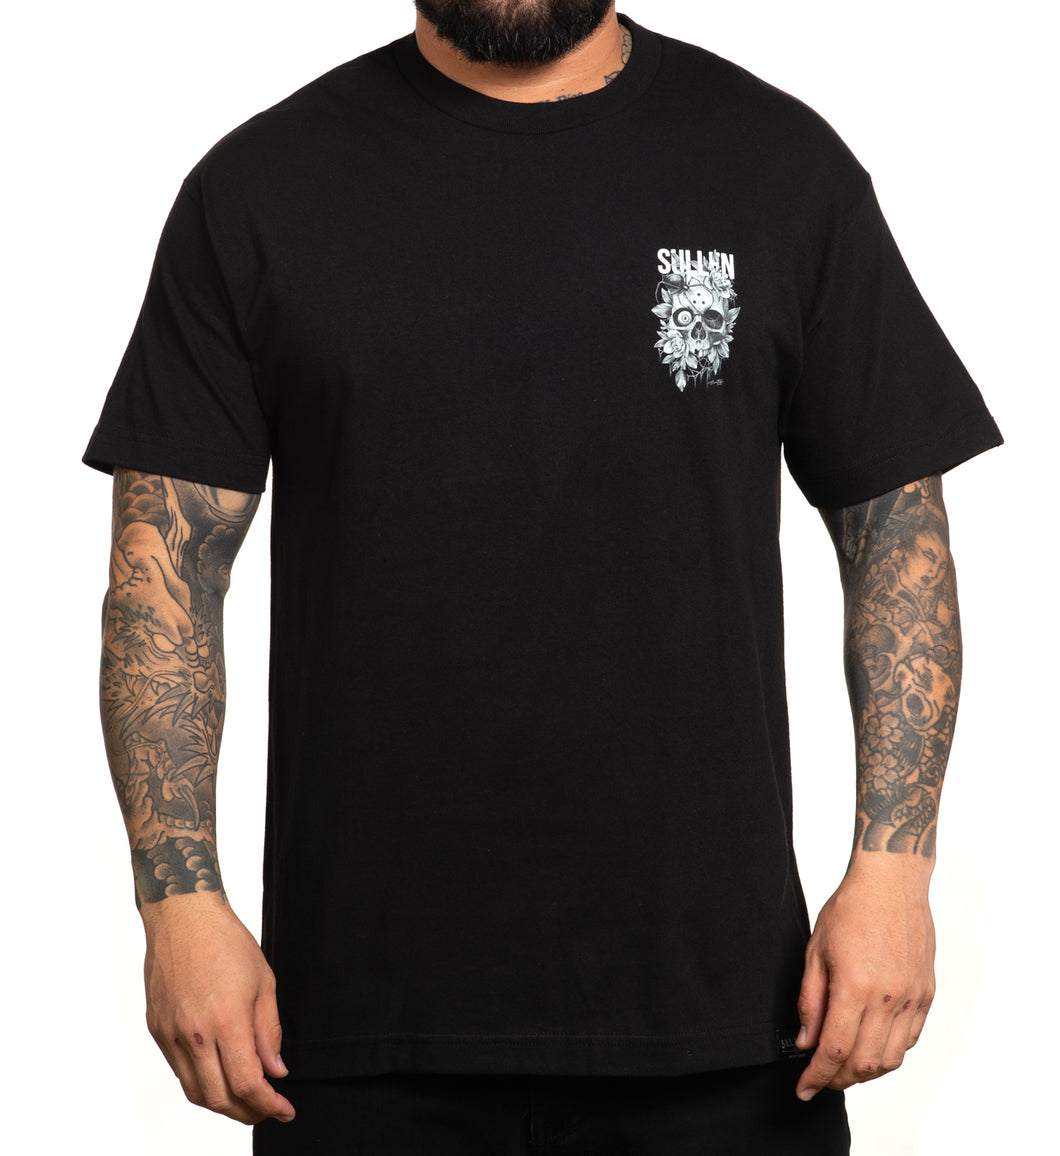 Black tee with skull and spider